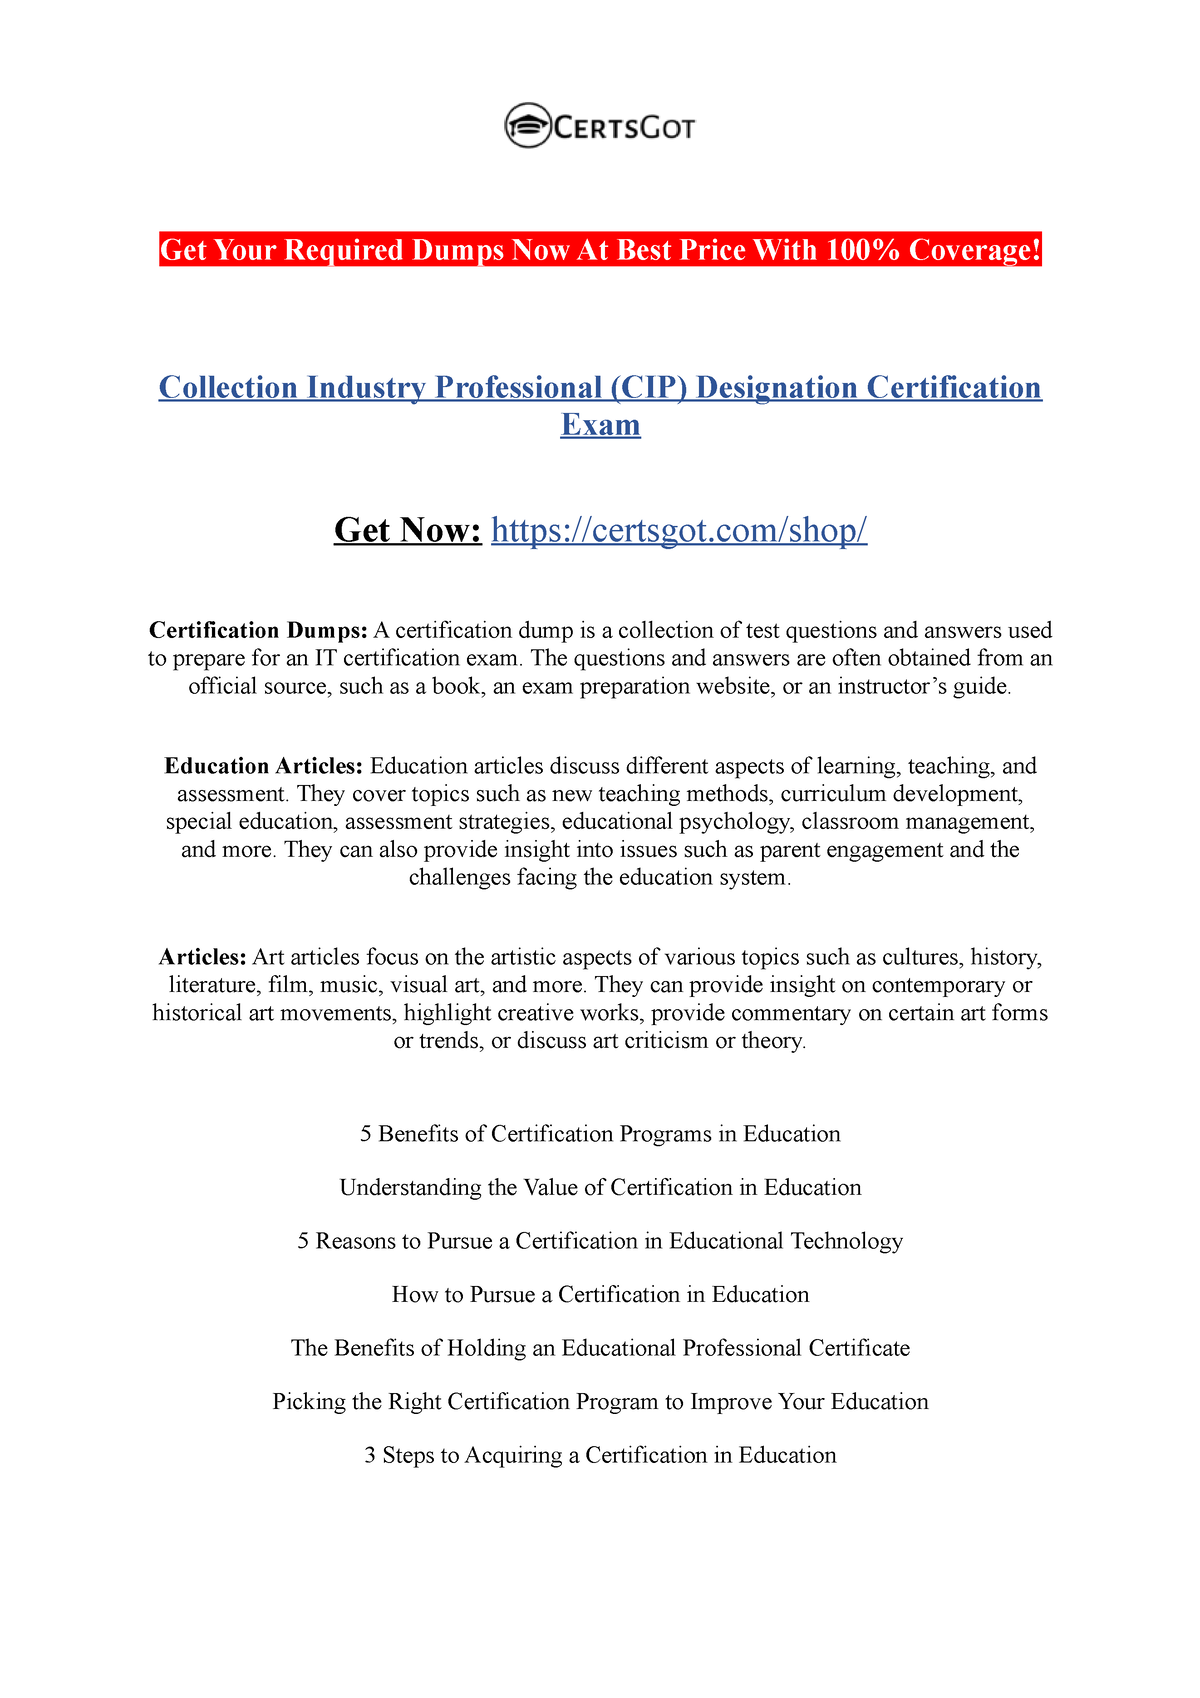 Collection Industry Professional (CIP) Designation Certification Exam